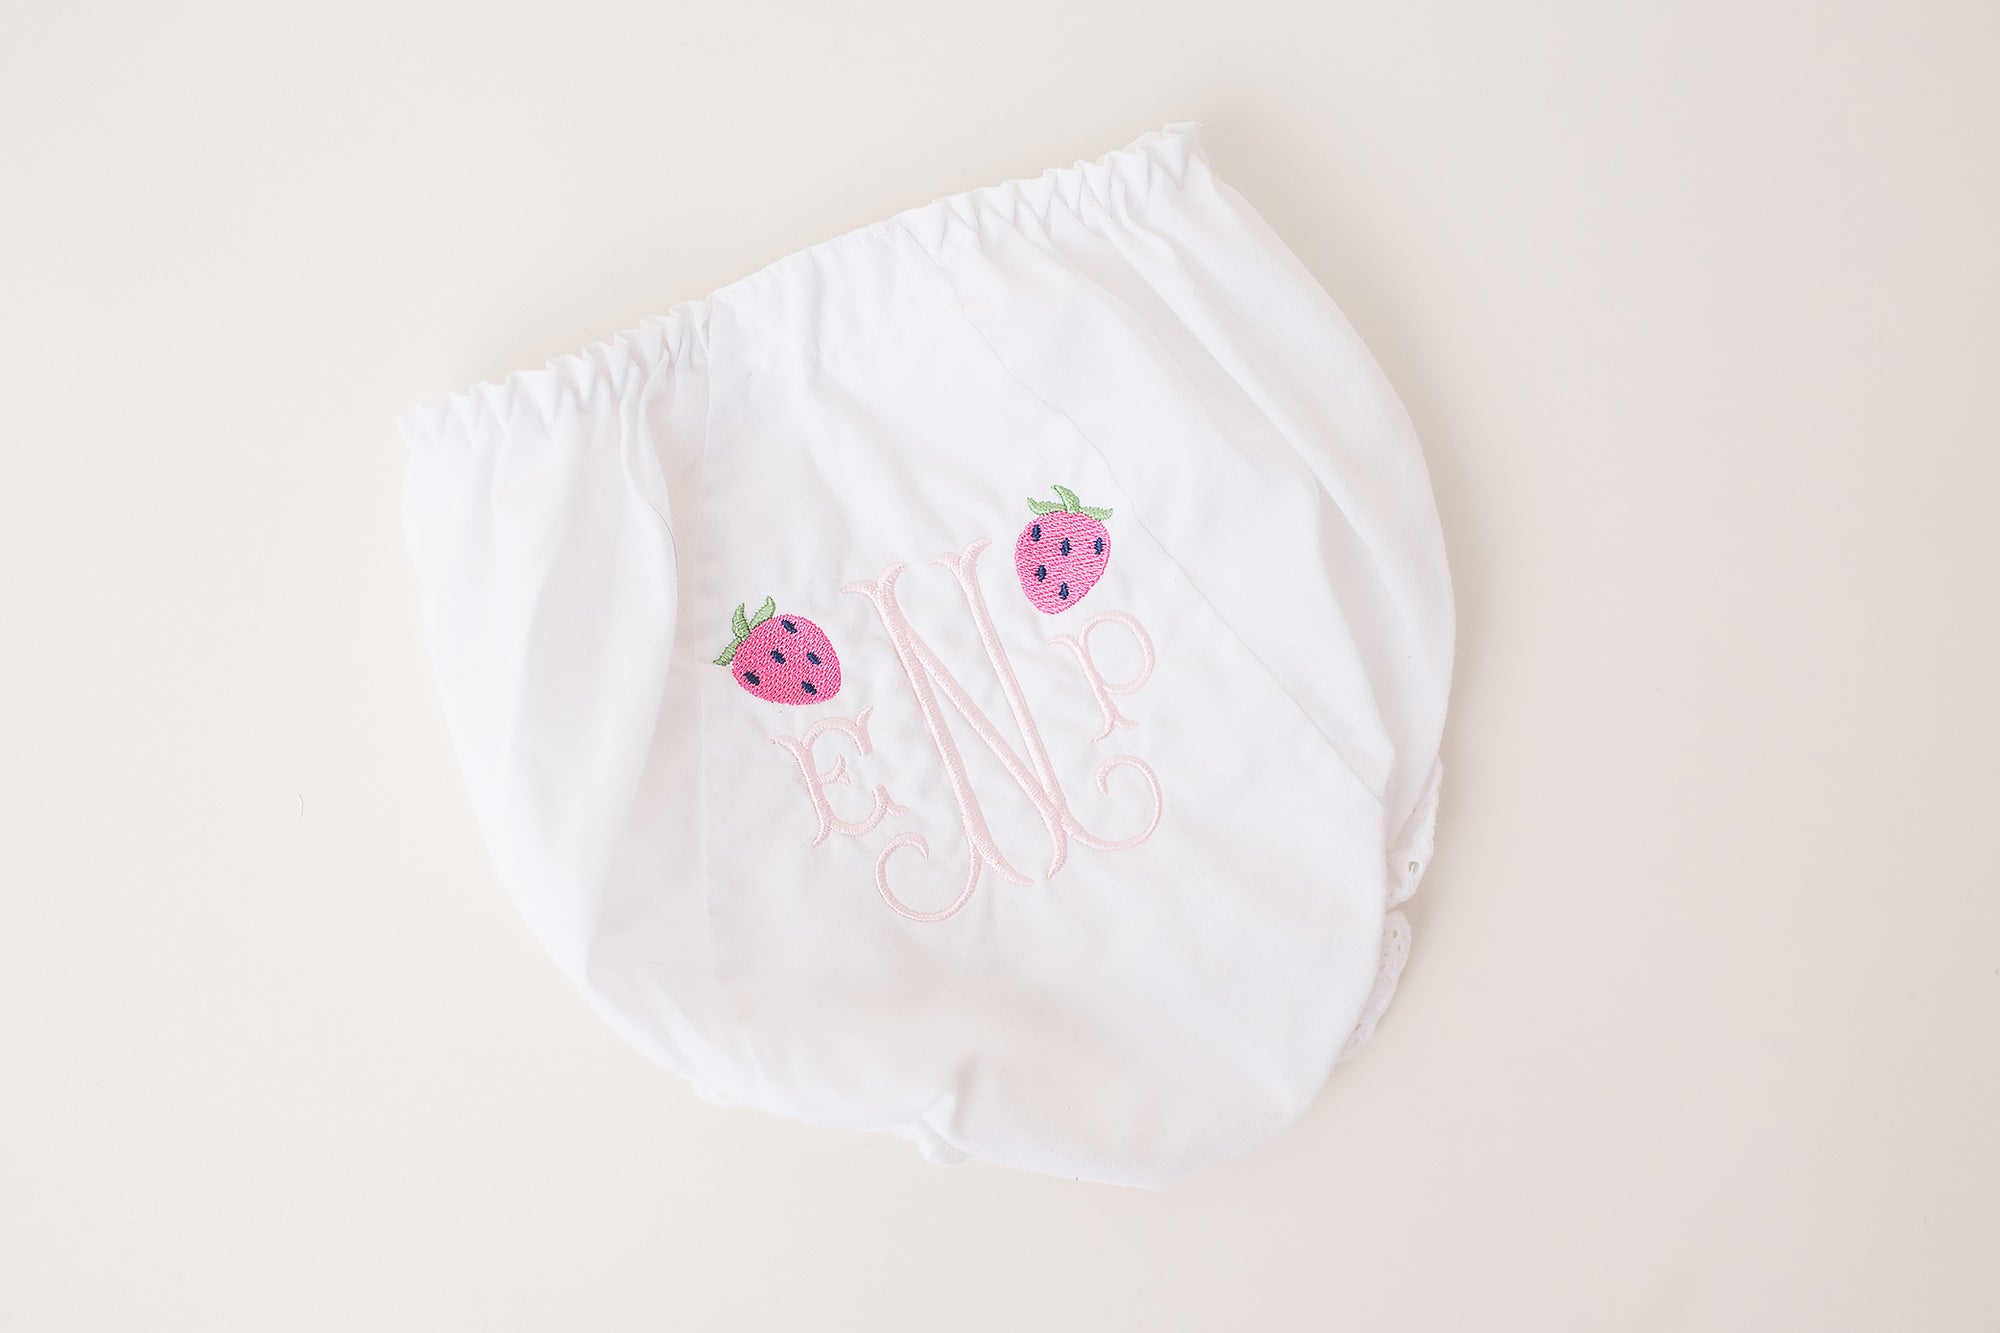 Baby Girls White Elastic Bloomer Diaper Cover with Embroidered